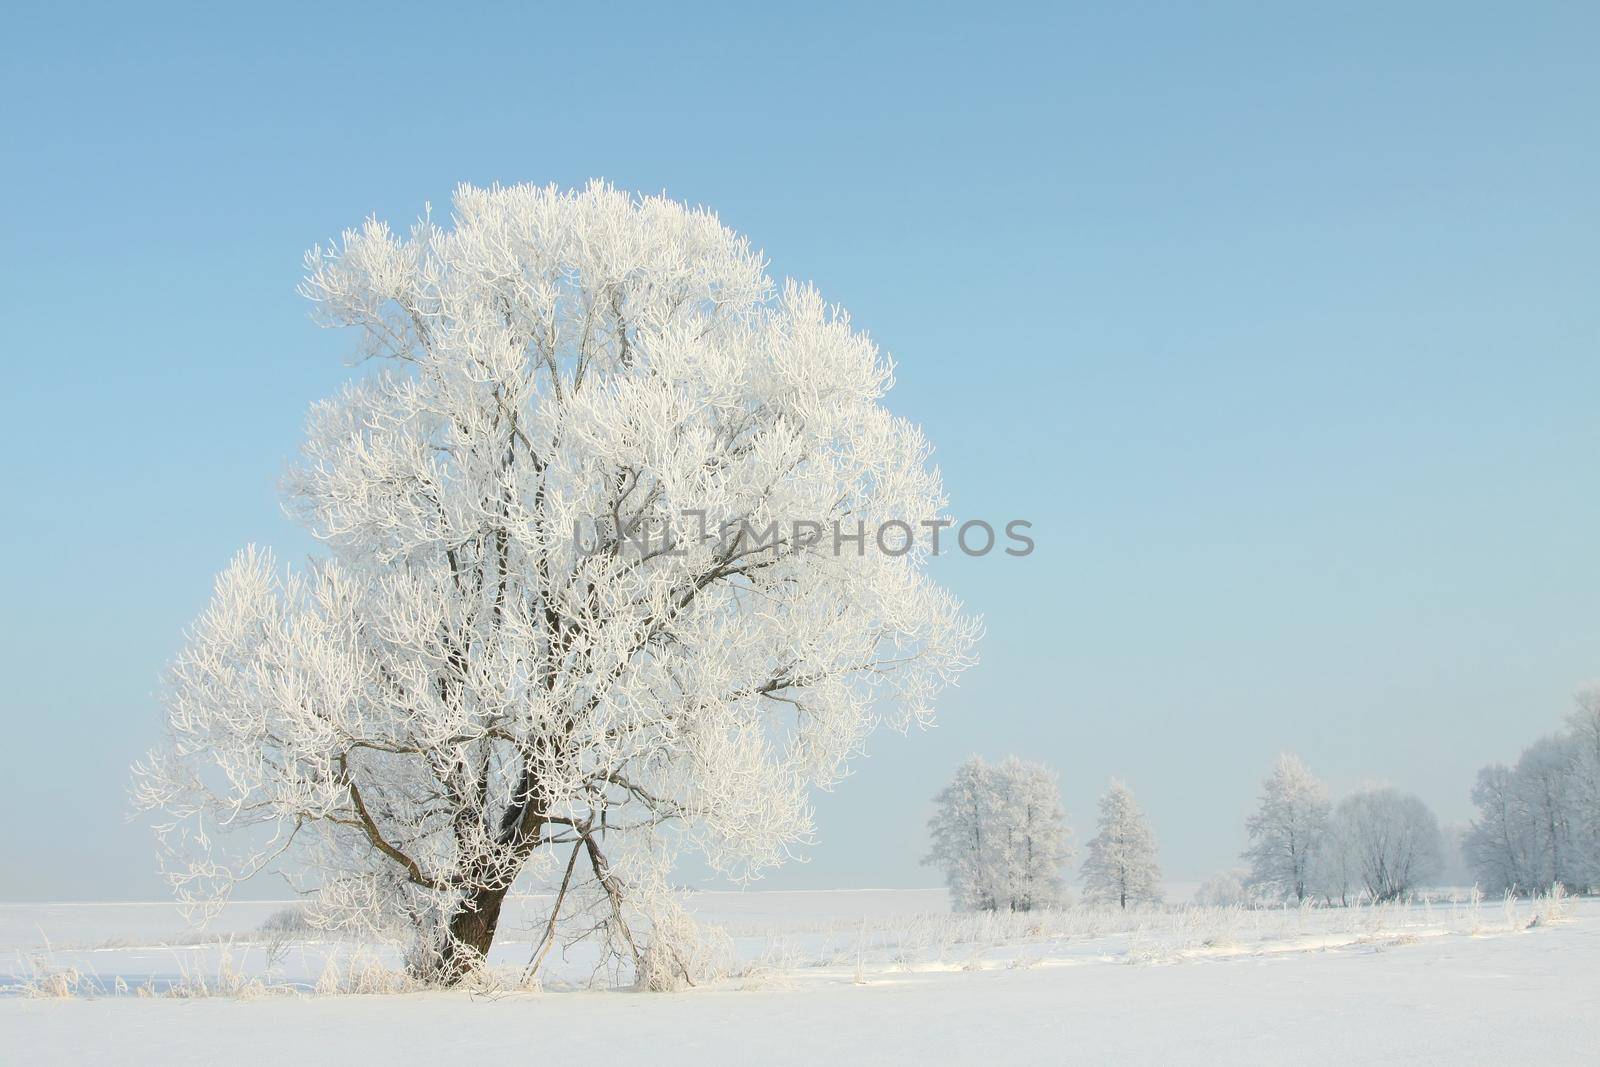 Winter landscape at dawn by nature78